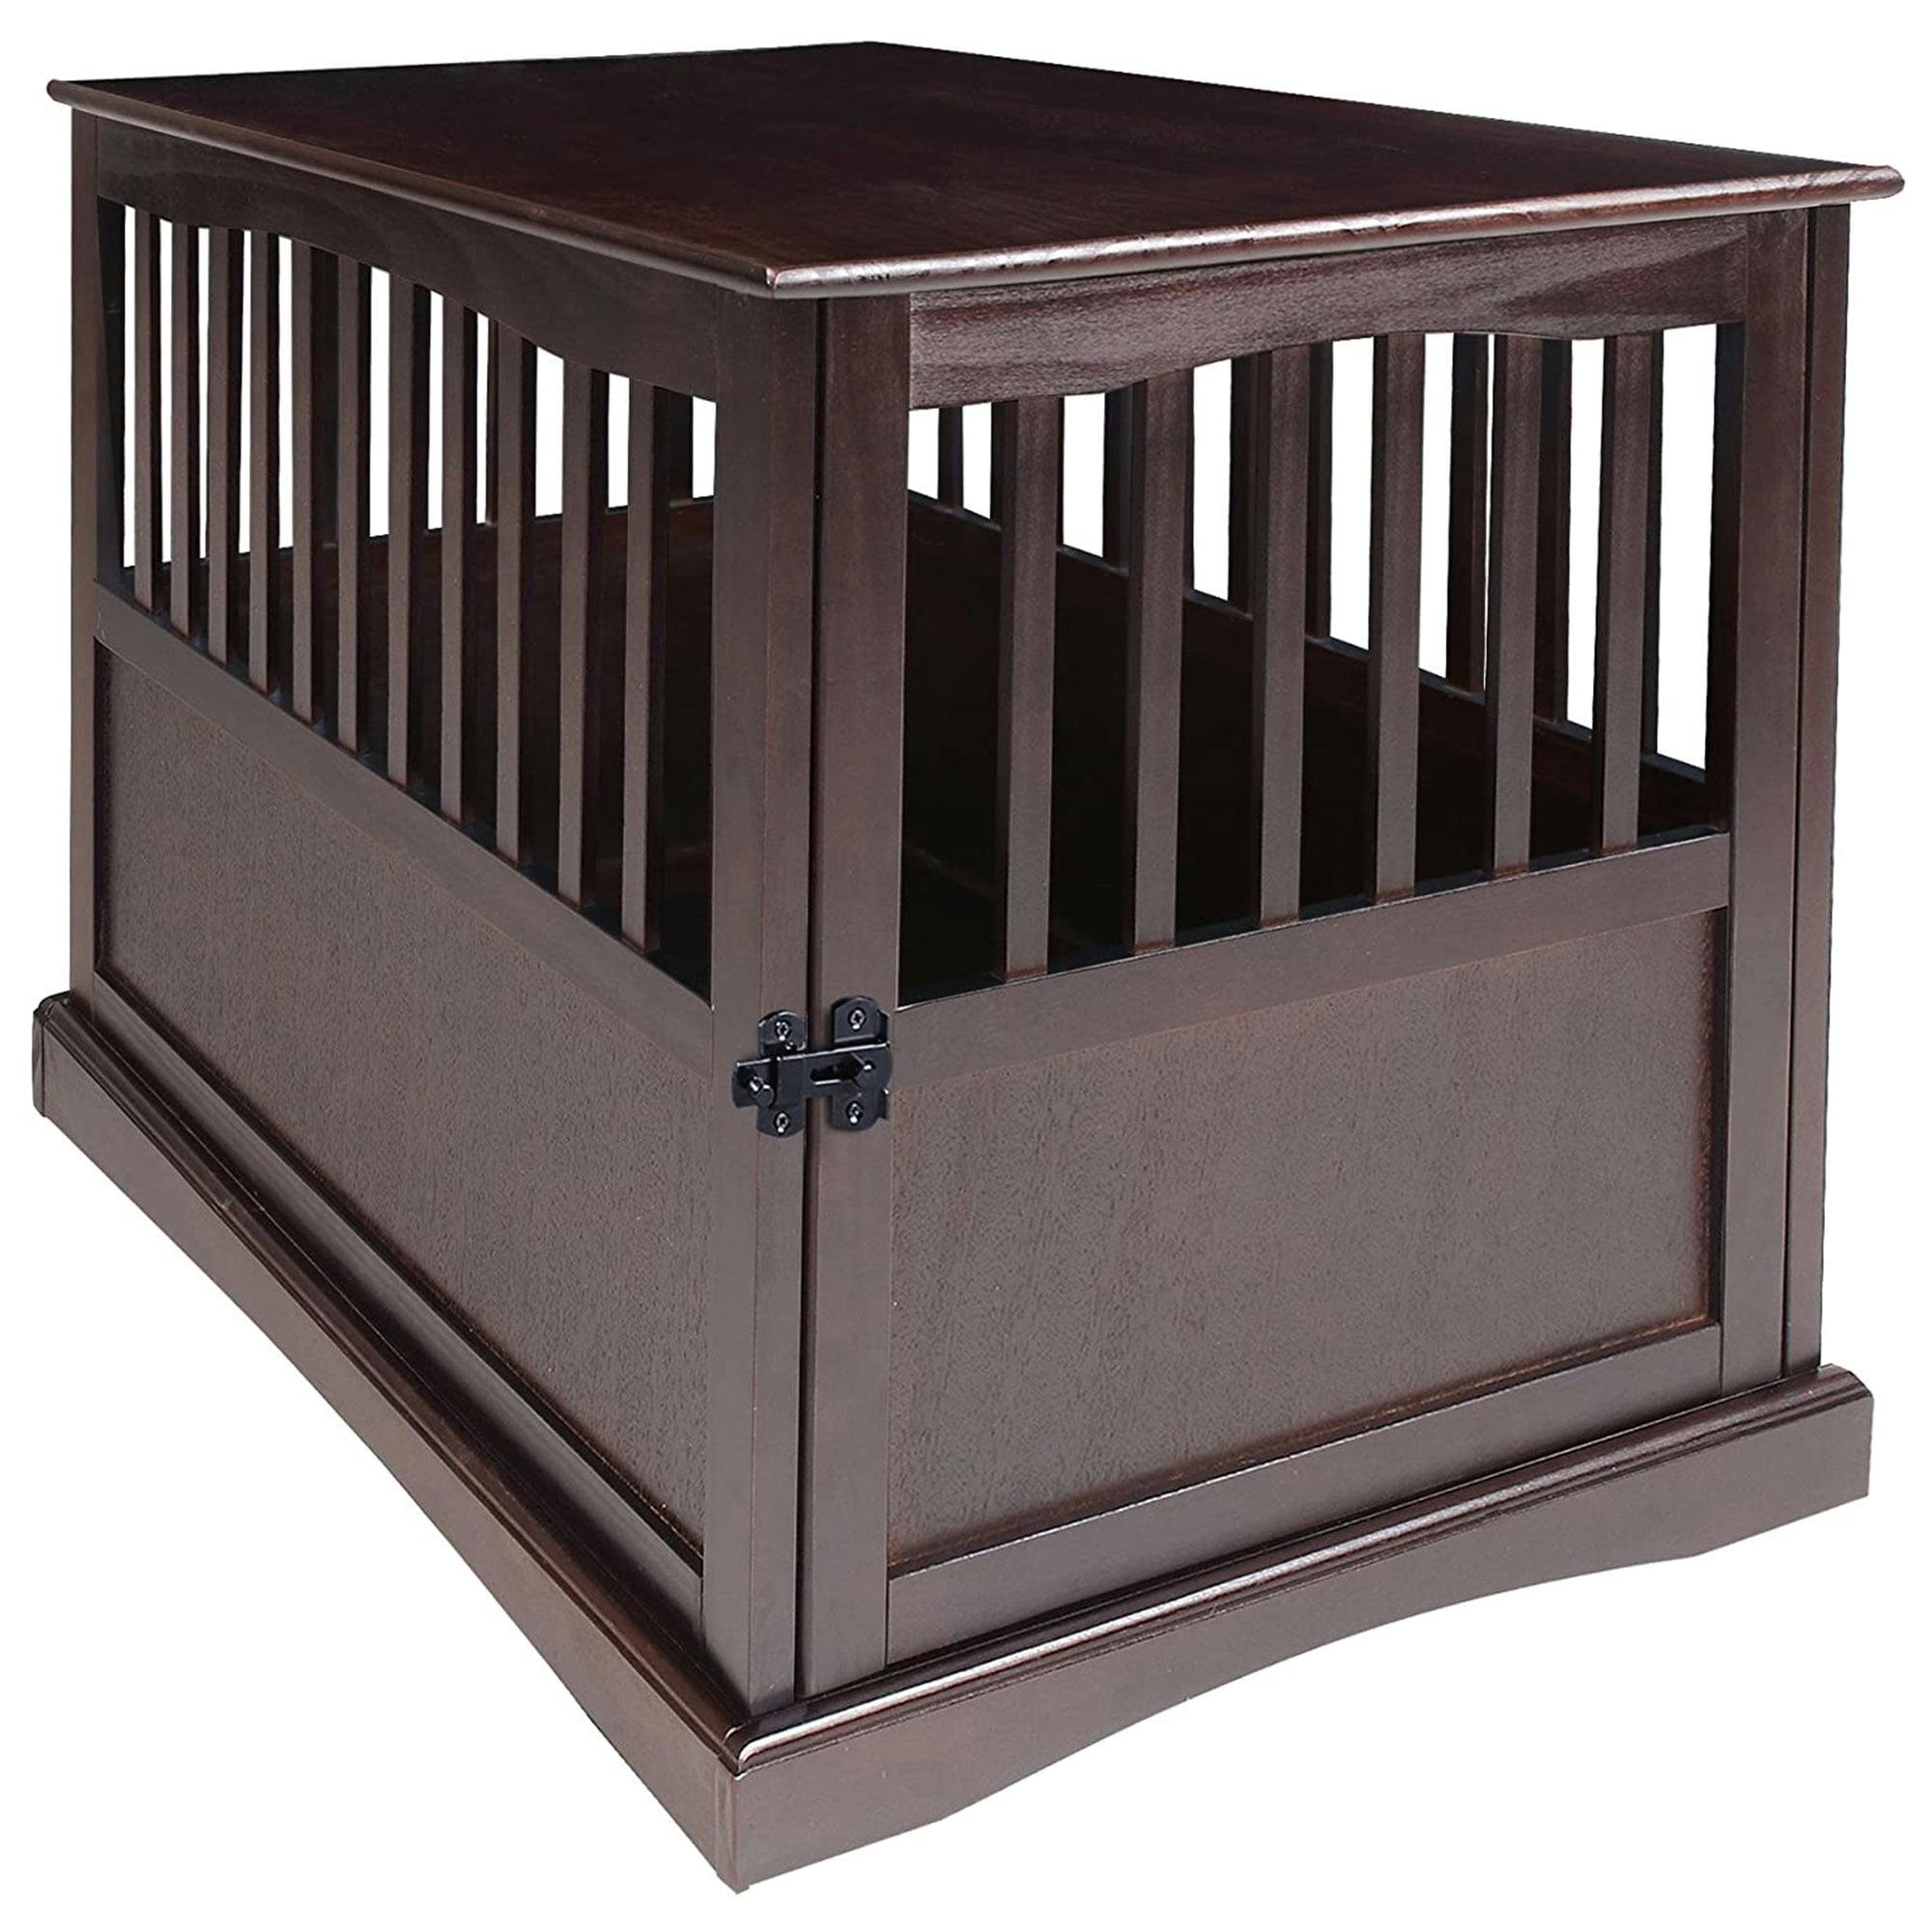 Espresso Deluxe Medium Pet Crate End Table up to 40 Lbs